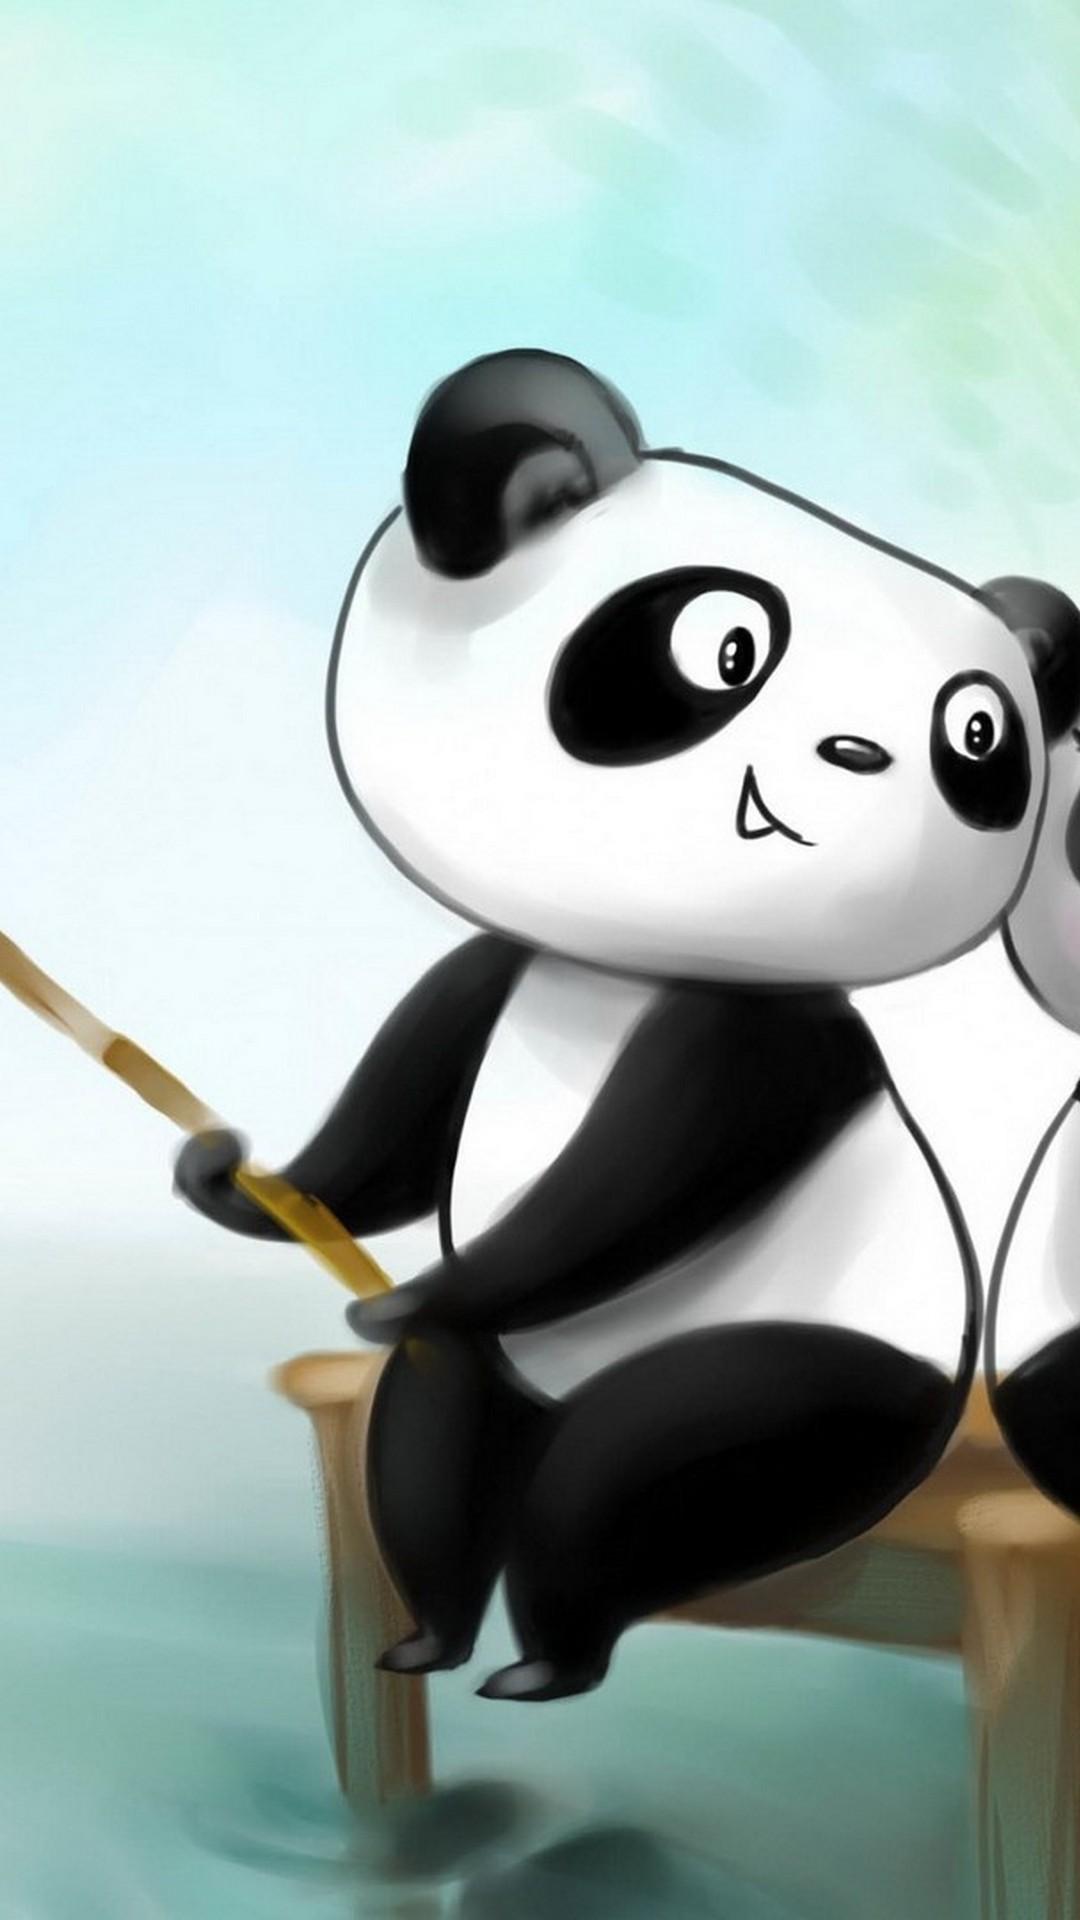 Cute Panda Wallpaper For Android Android Wallpaper